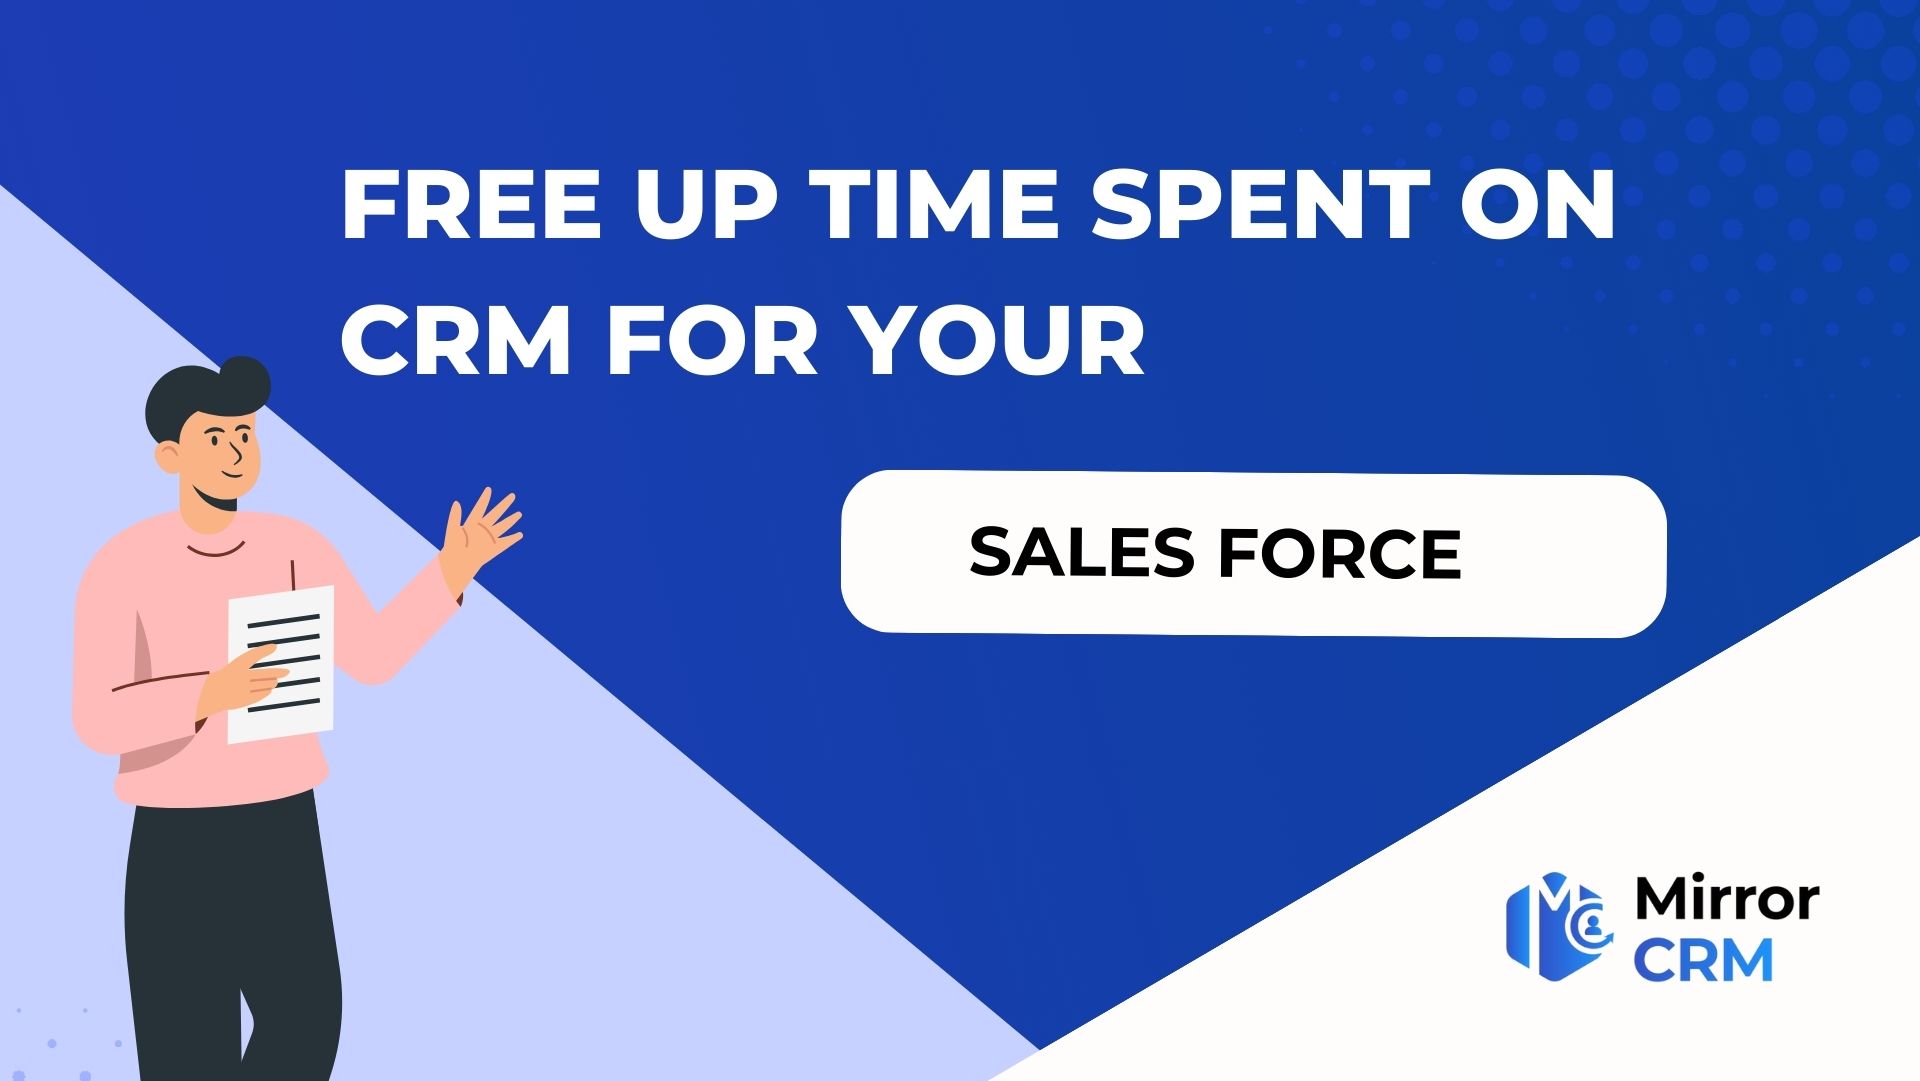 How can you free up time spent on CRM for your sales force?